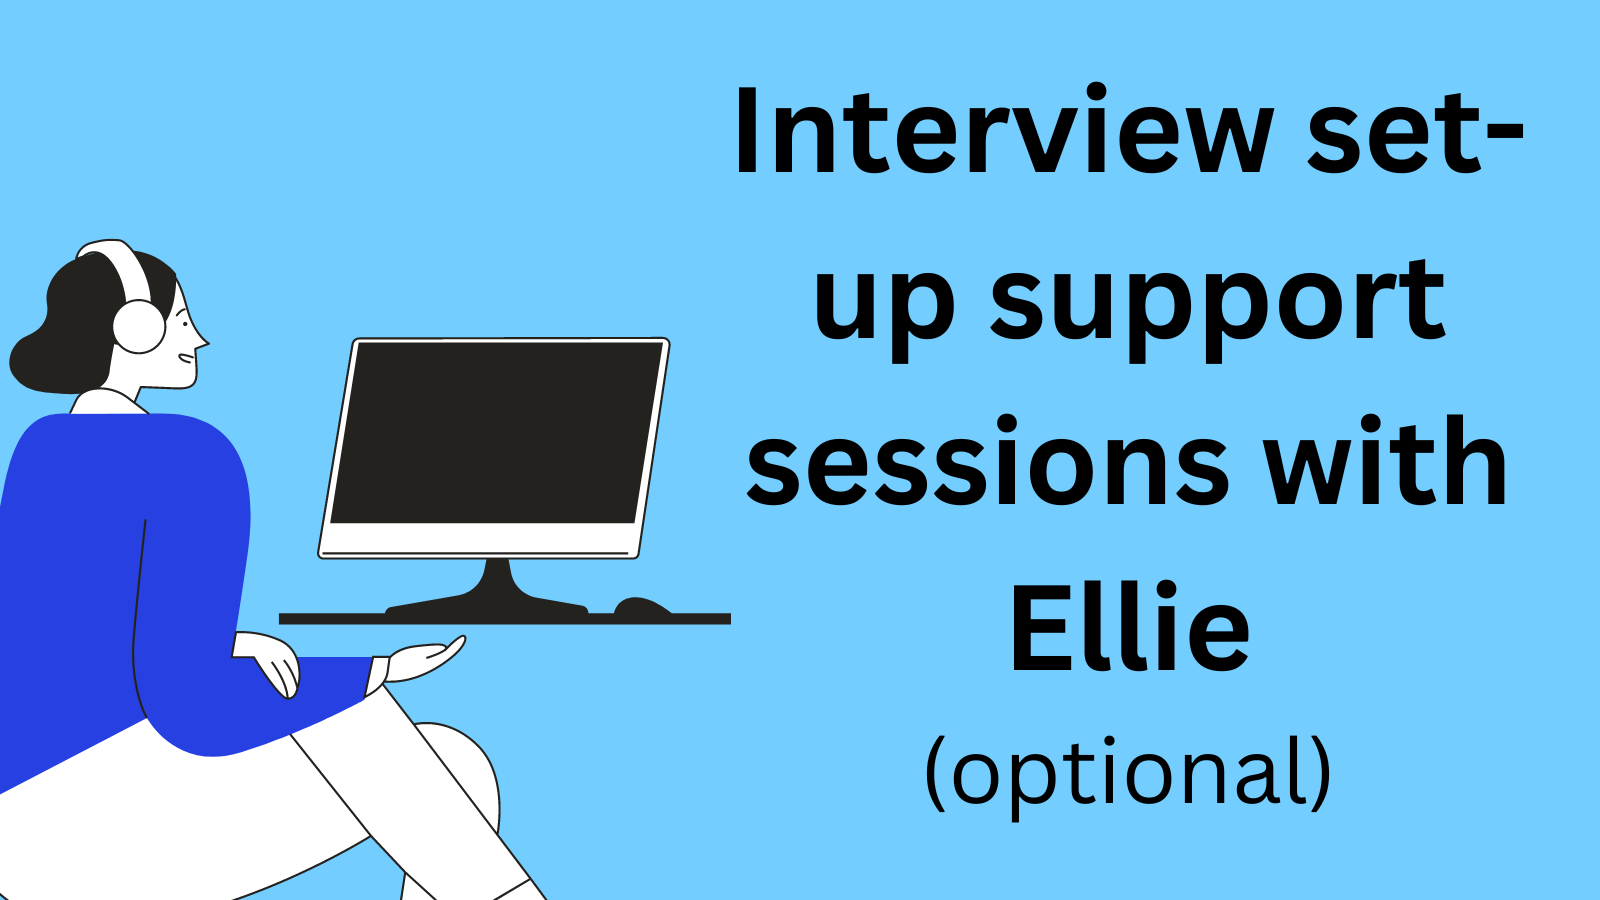 Interview set up support sessions